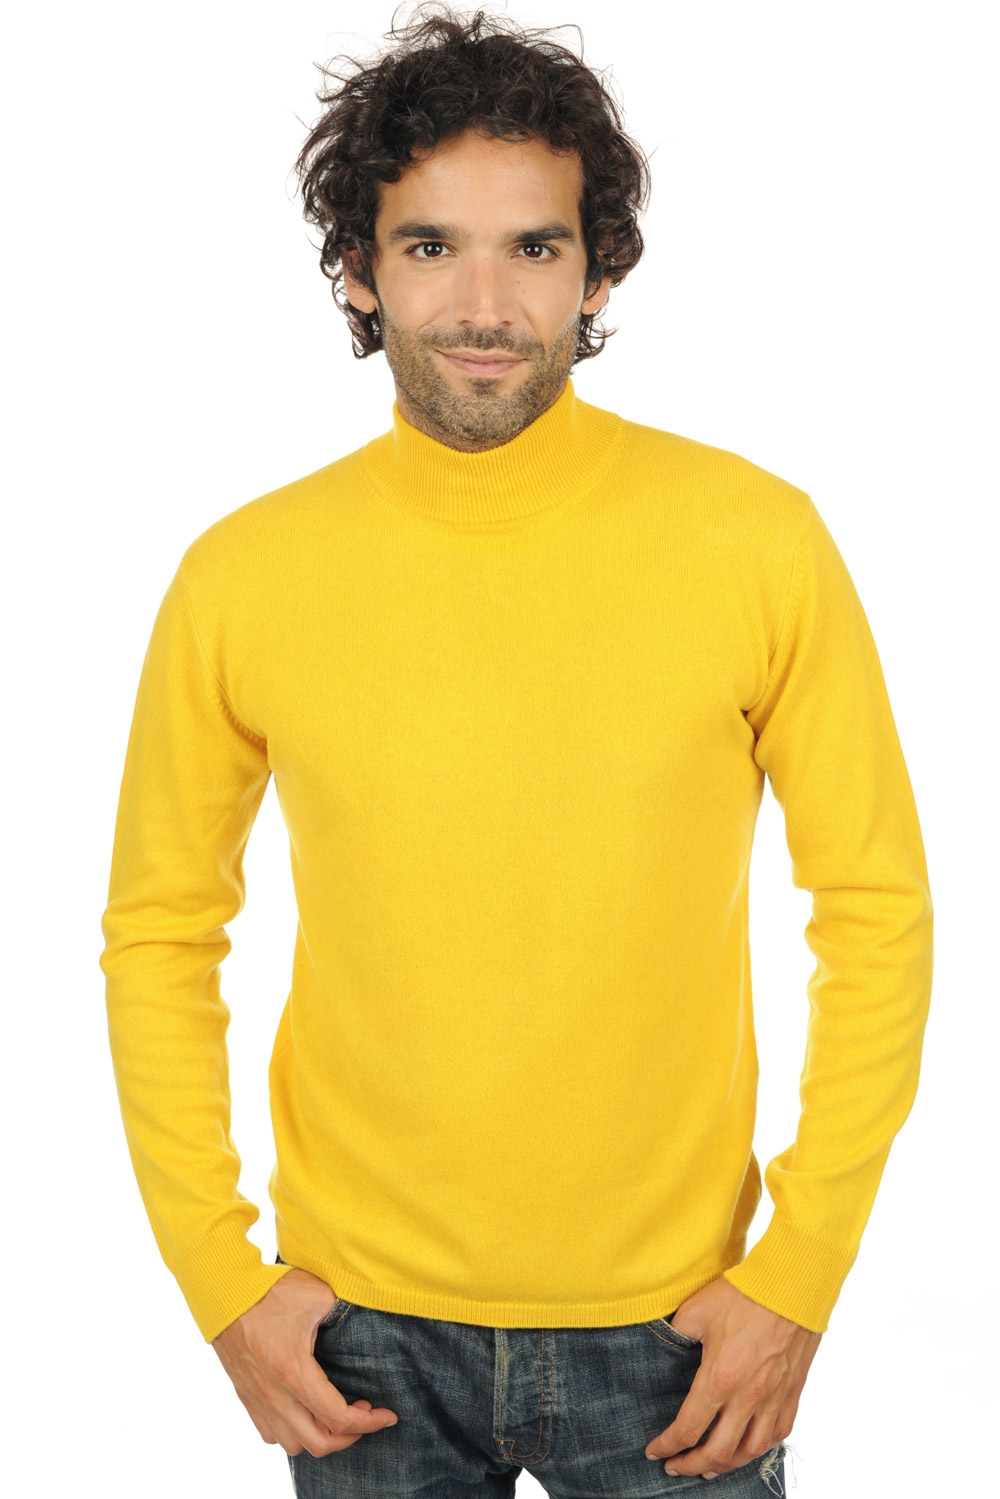 Cashmere men roll neck frederic cyber yellow s